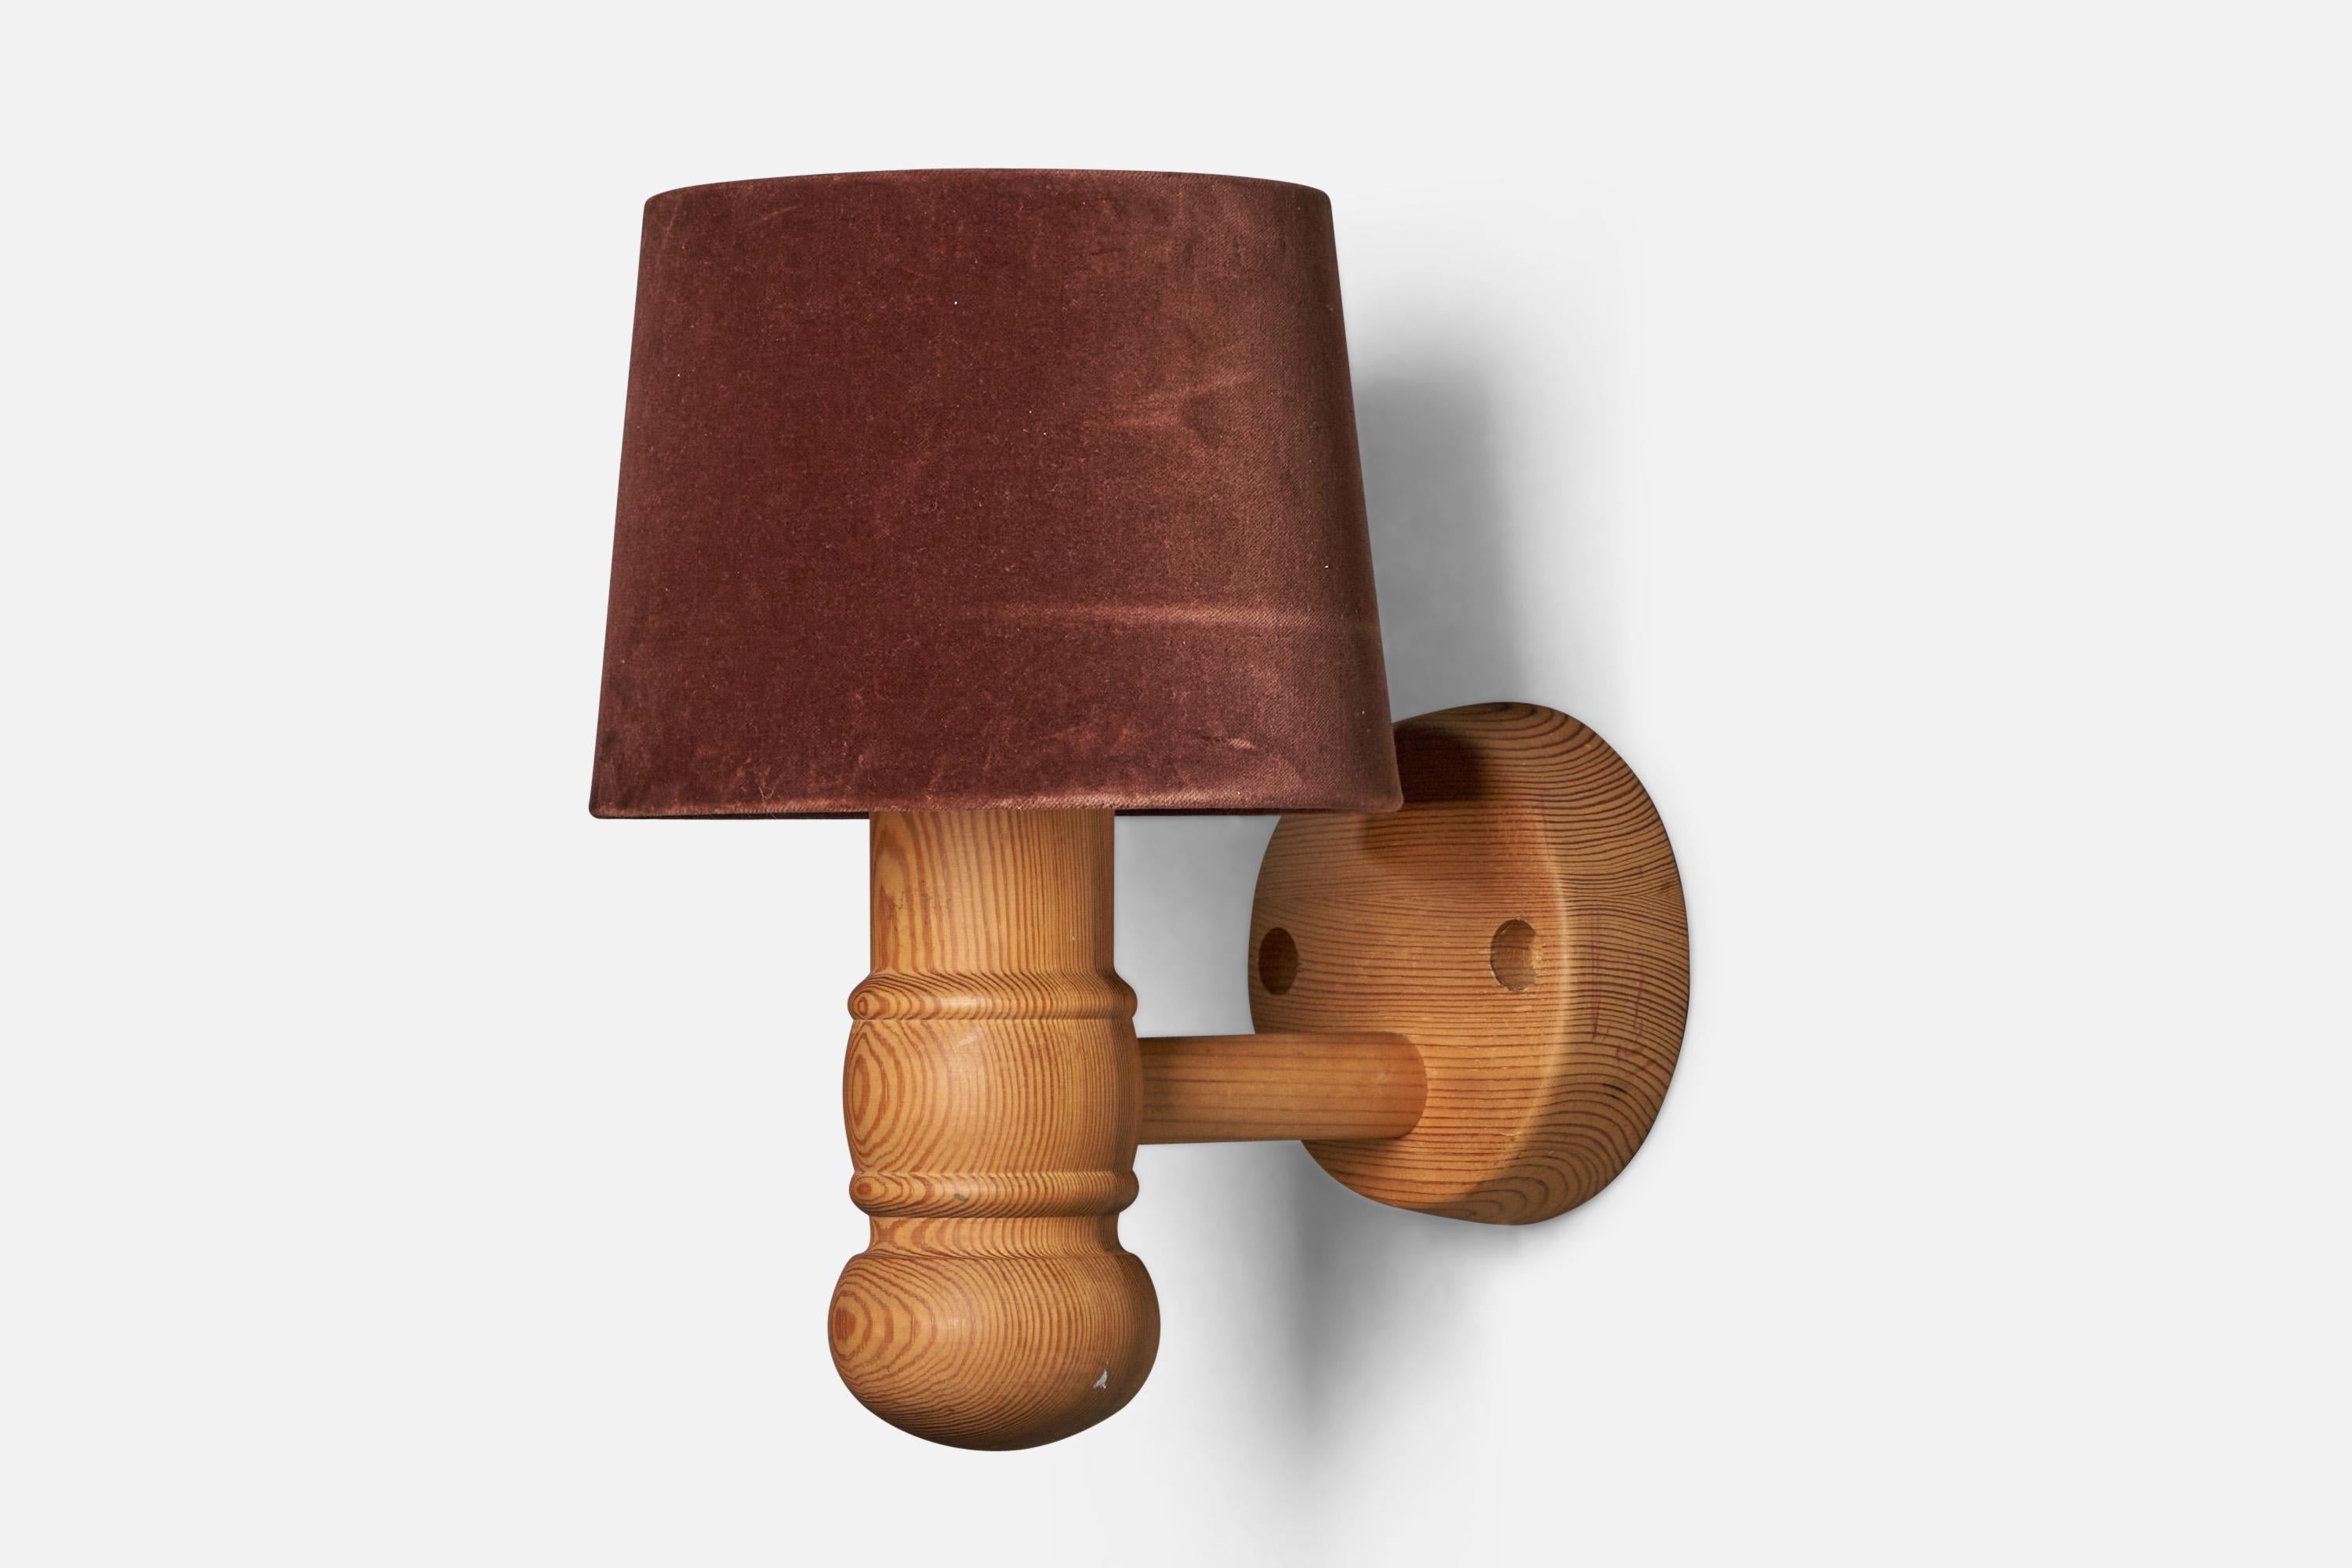 A pine and brown velvet wall light designed and produced in Sweden, 1970s.

Overall Dimensions (inches): 15” H x 9” W x 12” D
Bulb Specifications: E-26 Bulb
Number of Sockets: 1